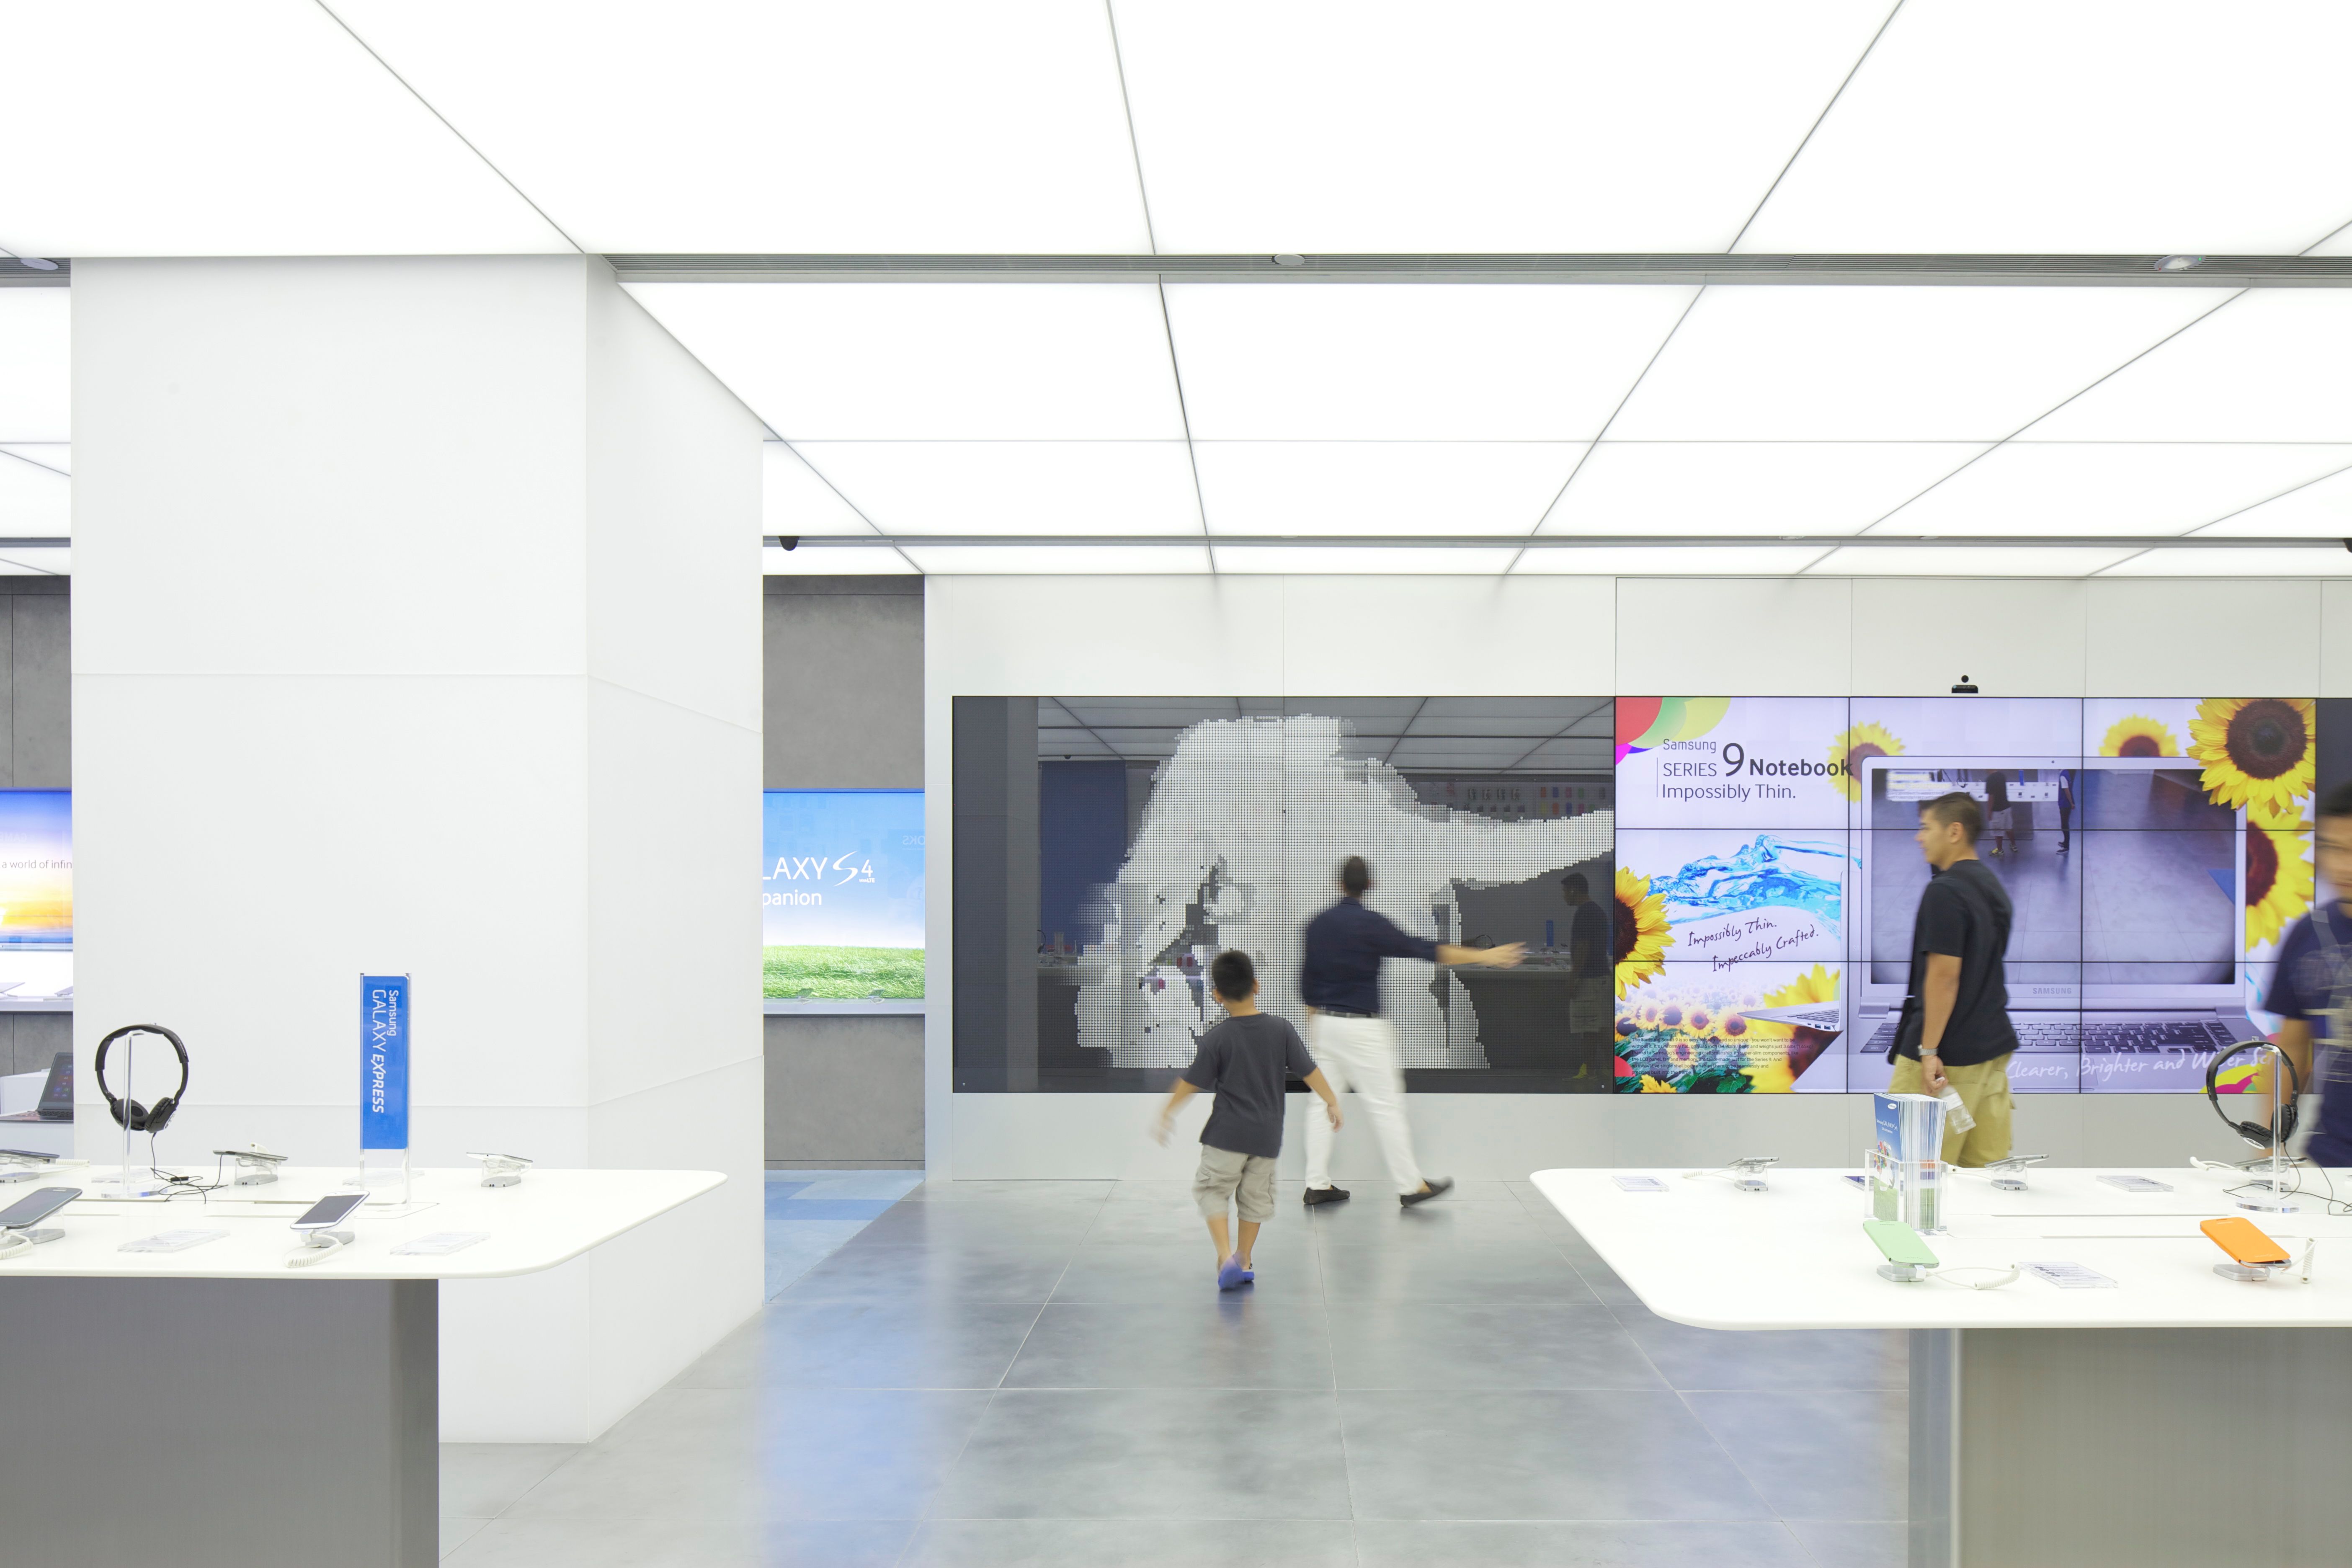 Samsung Experience Stores